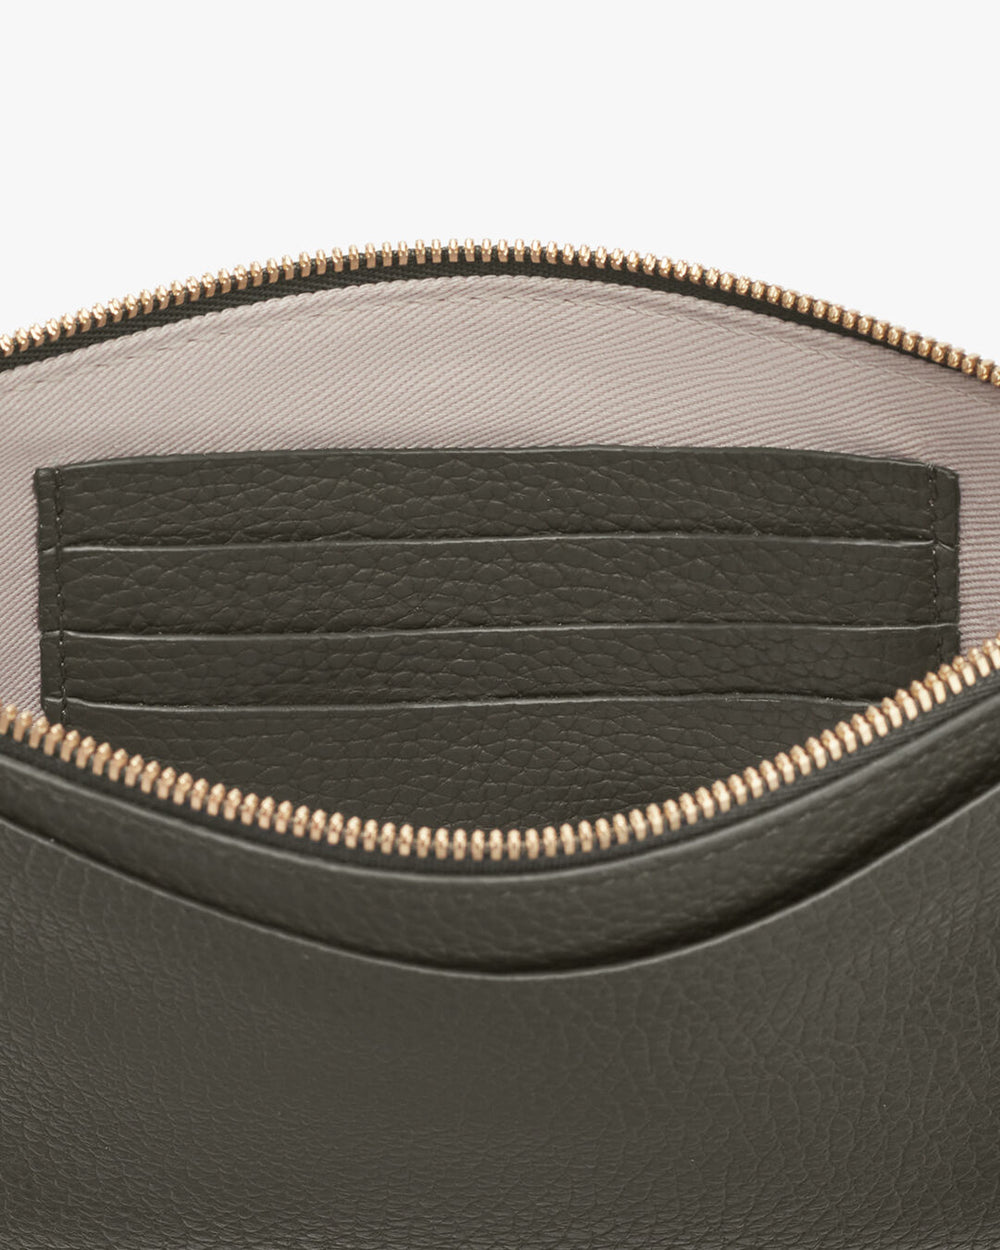 Close-up of a bag with an open zipper showing inner compartments.